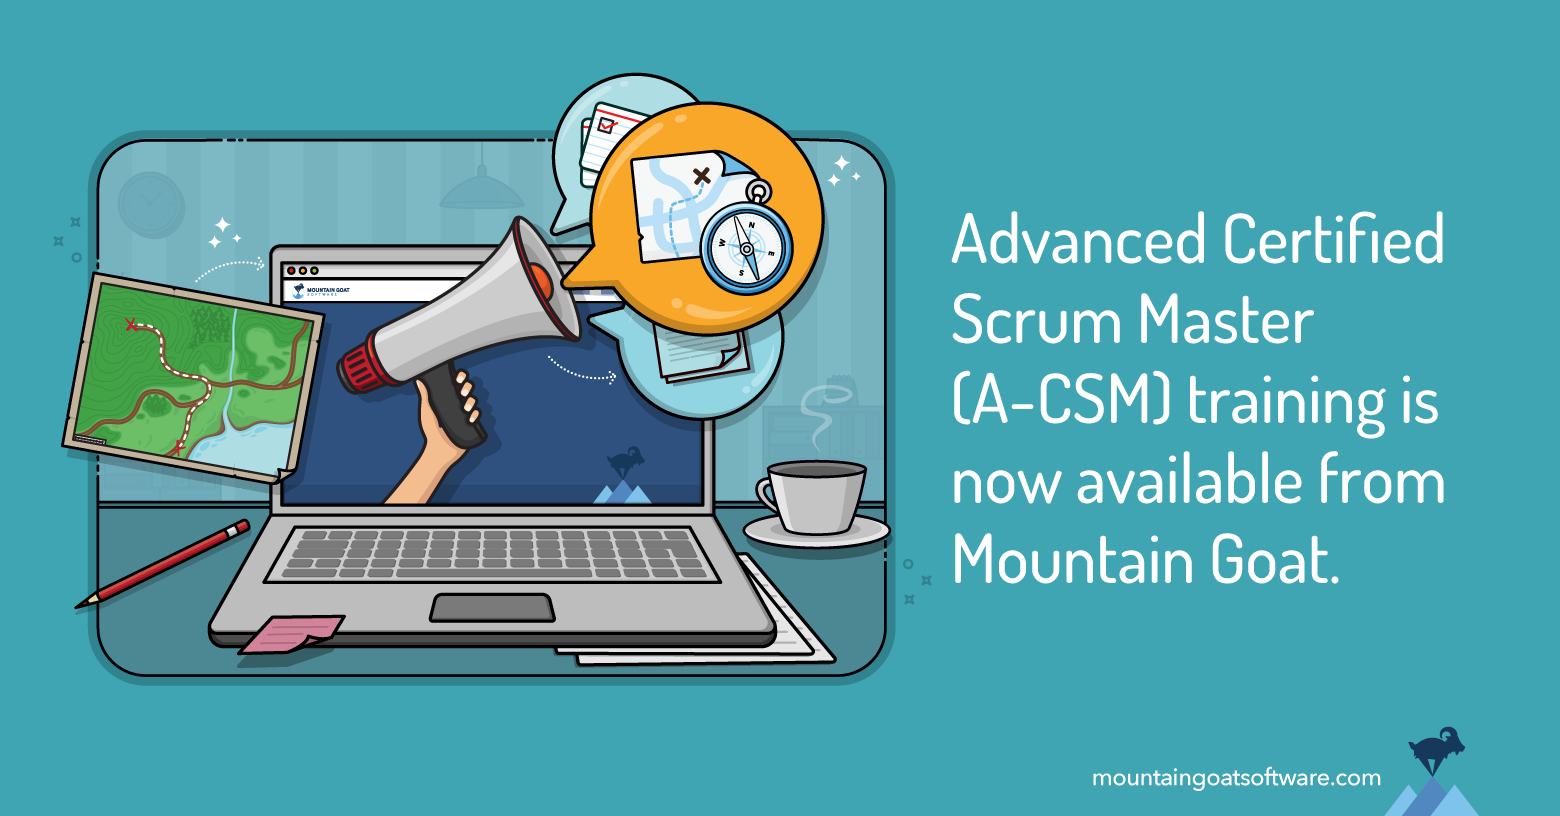 New: Advanced Certified ScrumMaster now available live, online